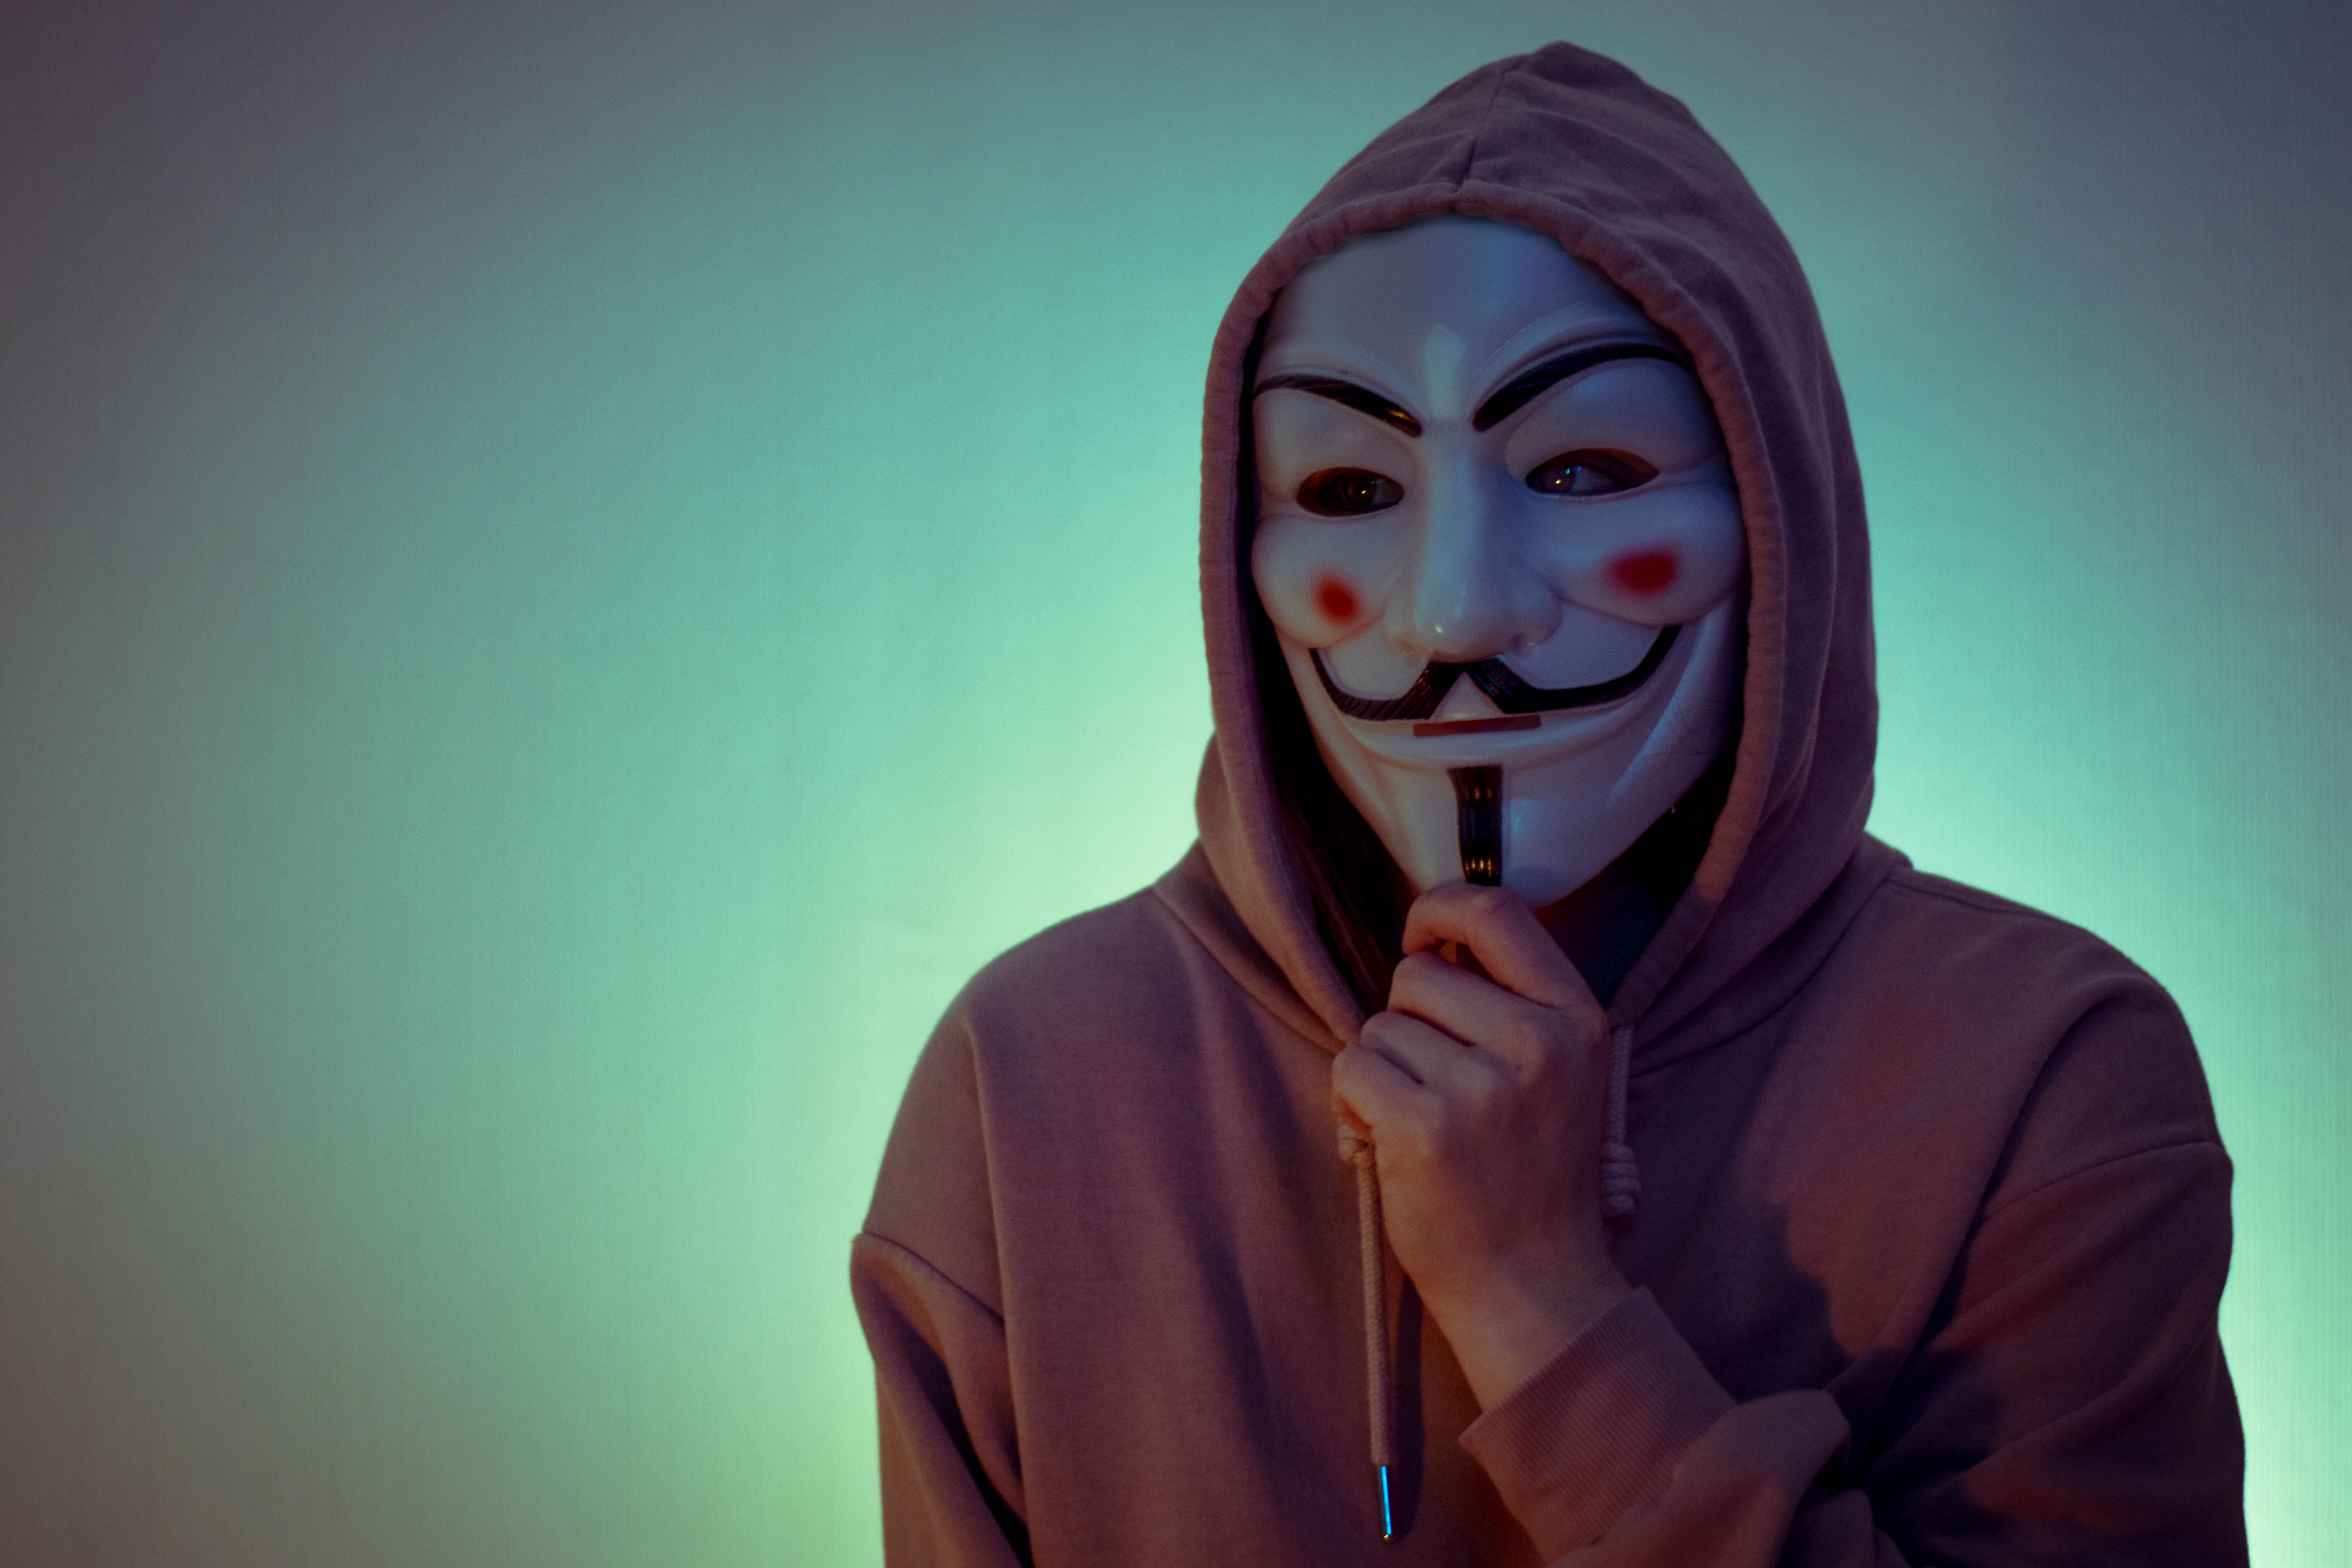 Portrait of a person wearing a hoodie and the Guy Fawkes mask